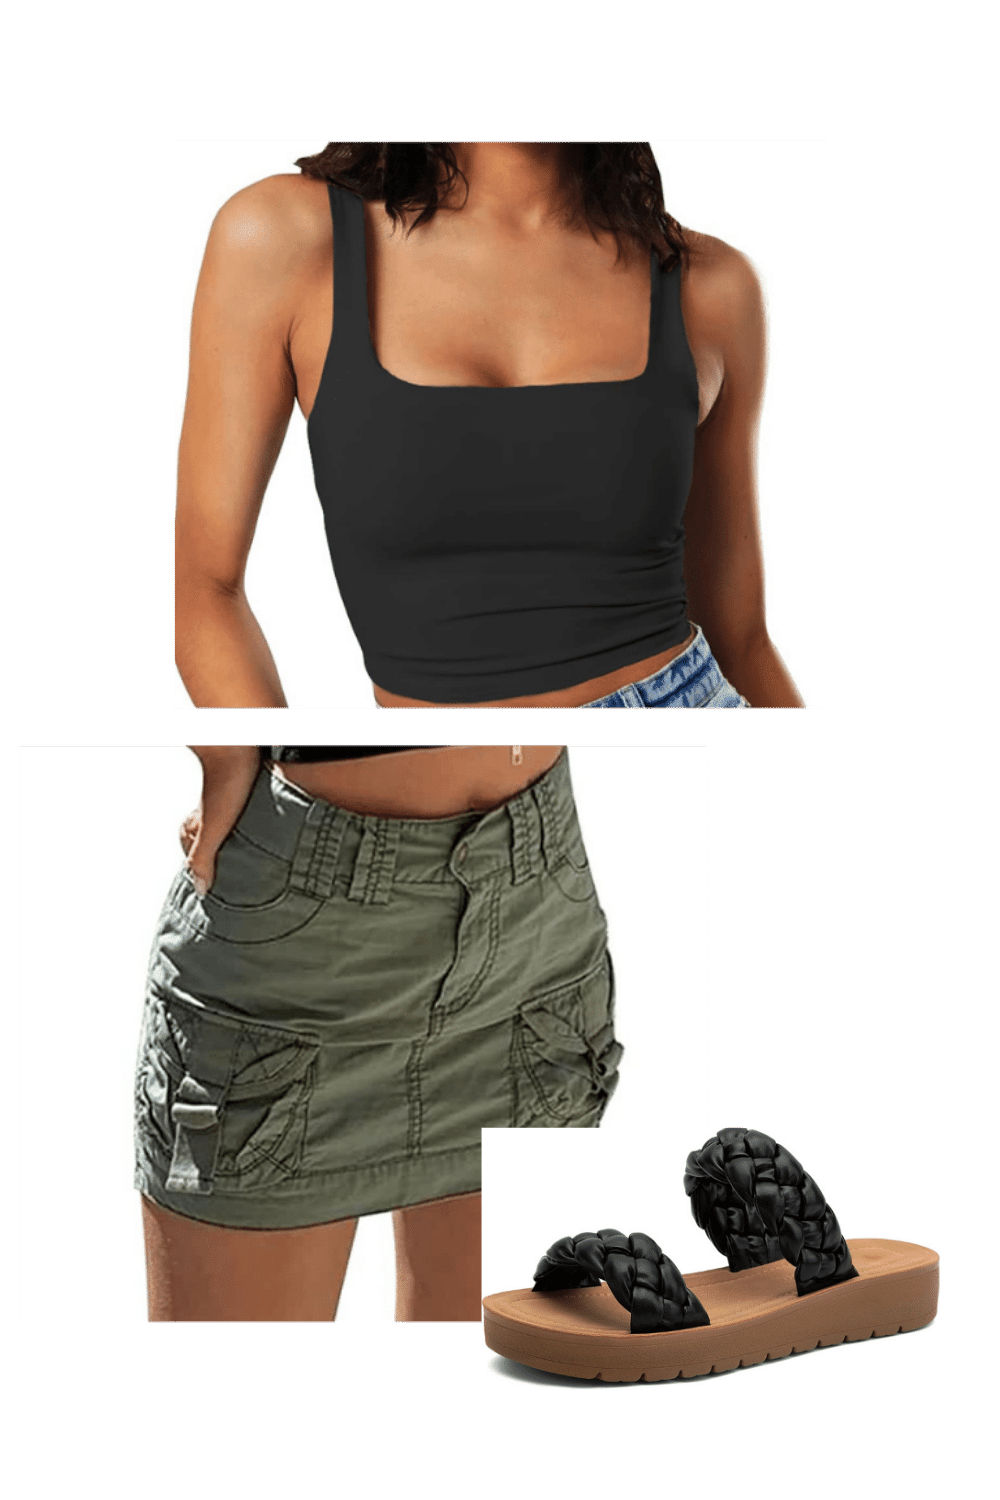 Cargo Skirt Outfits - Trendy and Practical